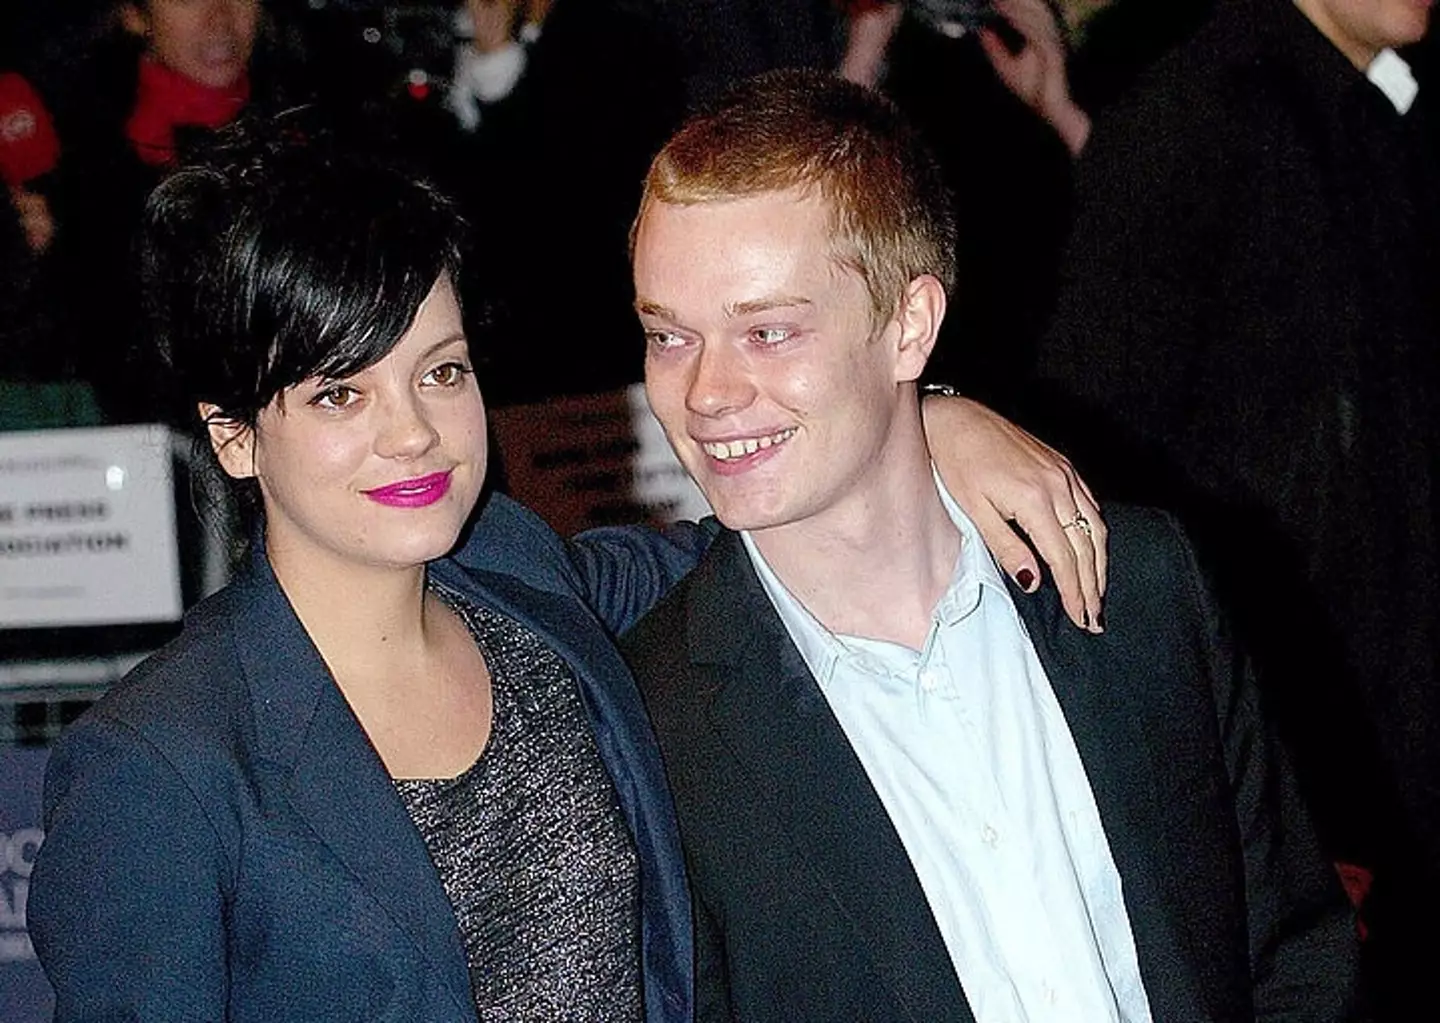 Lily Allen and her brother Alfie.